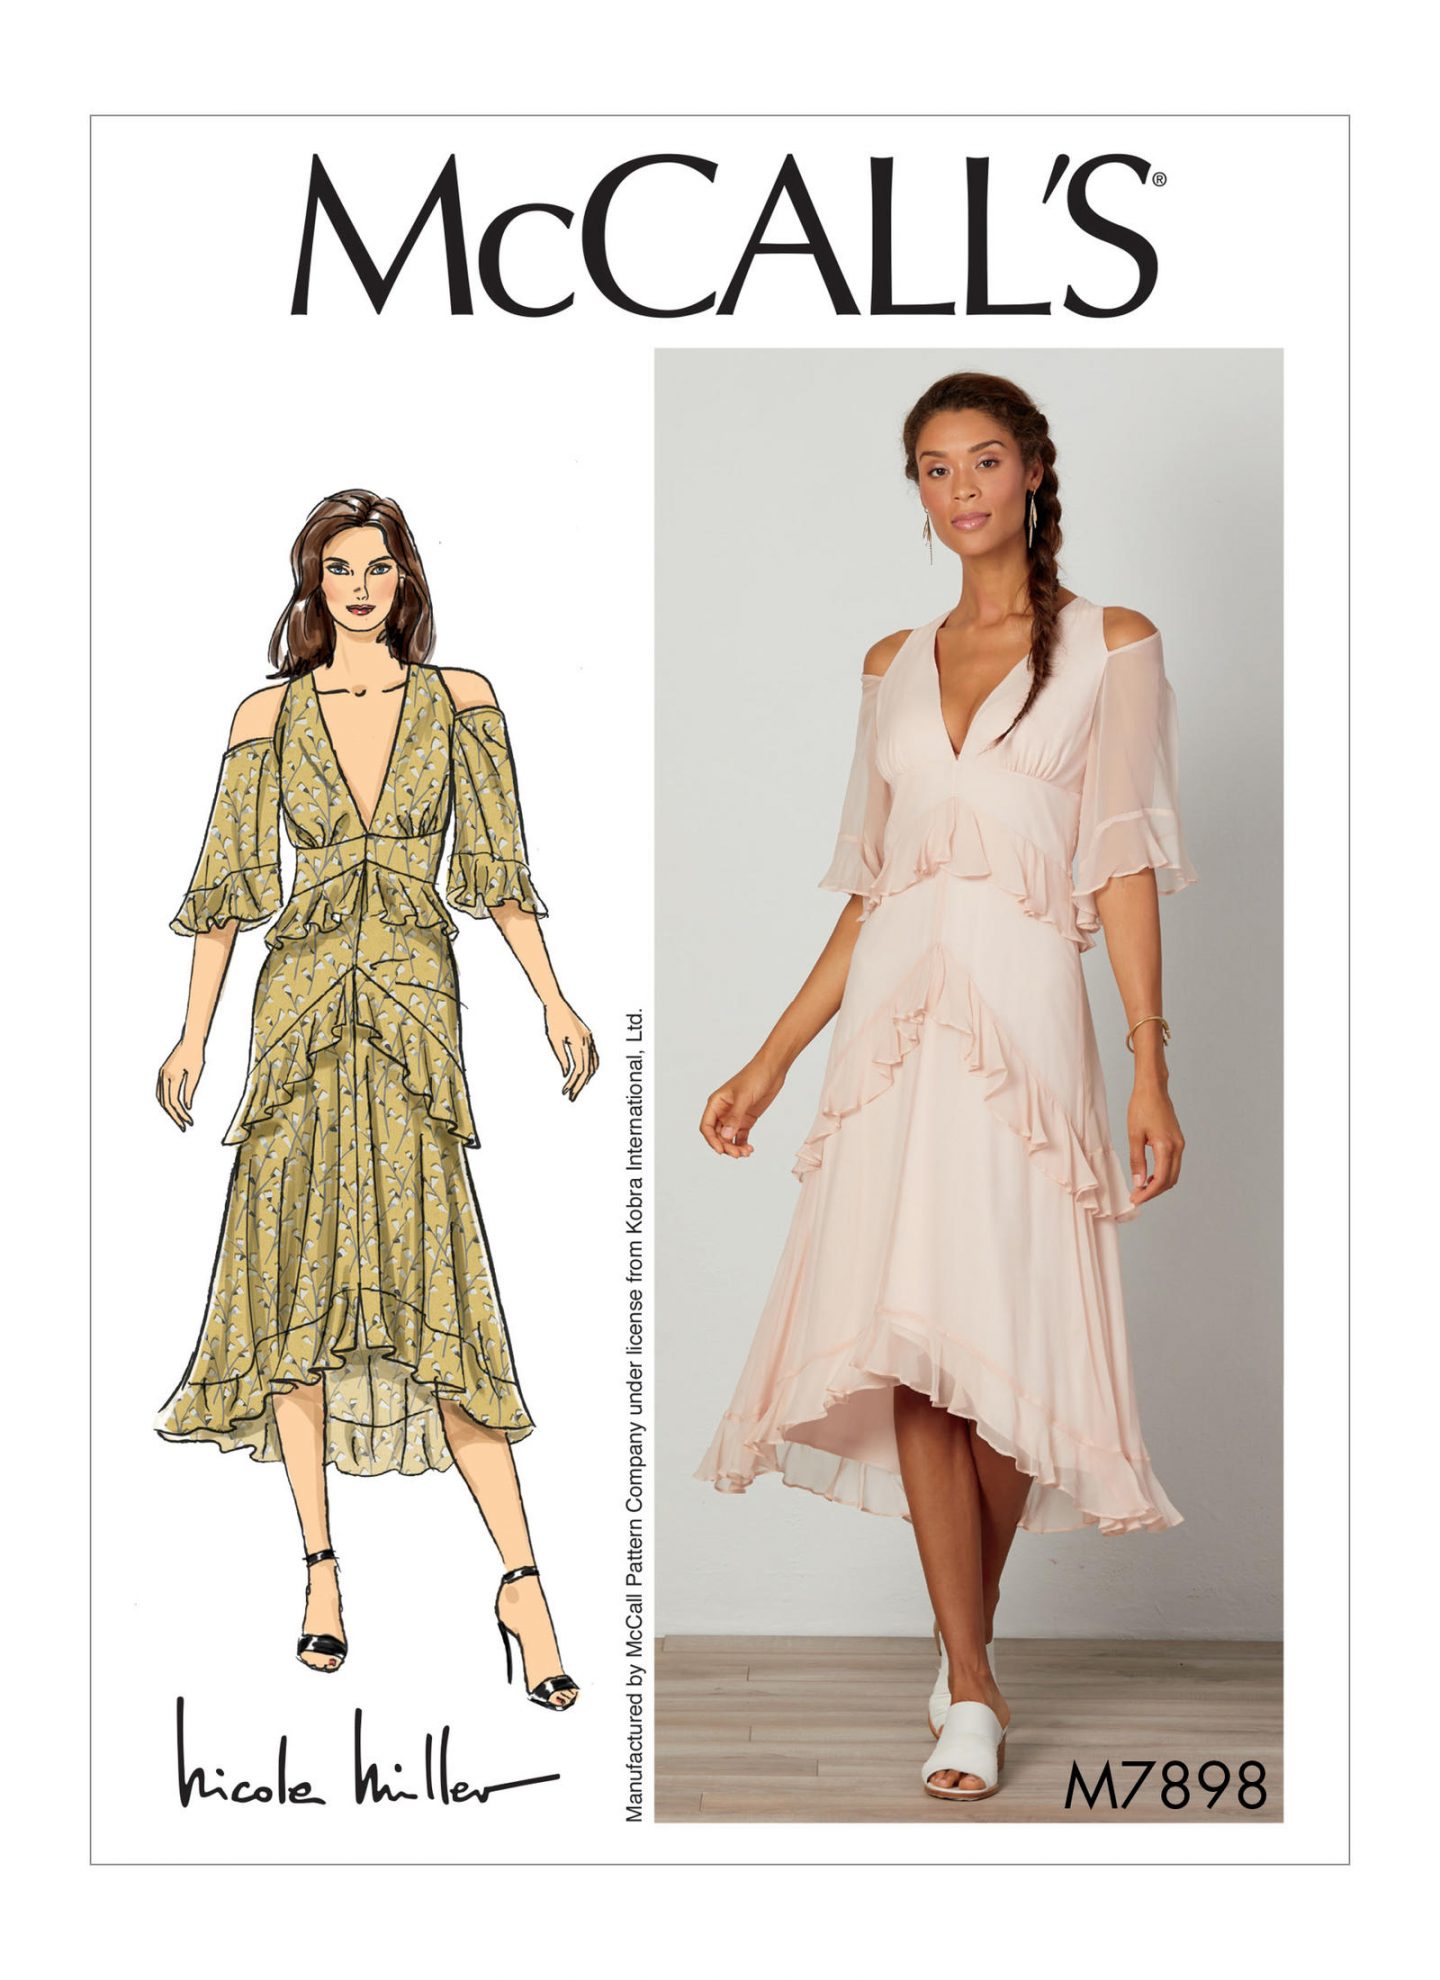 McCalls 7898 Spring trends 2019 to inspire your sewing